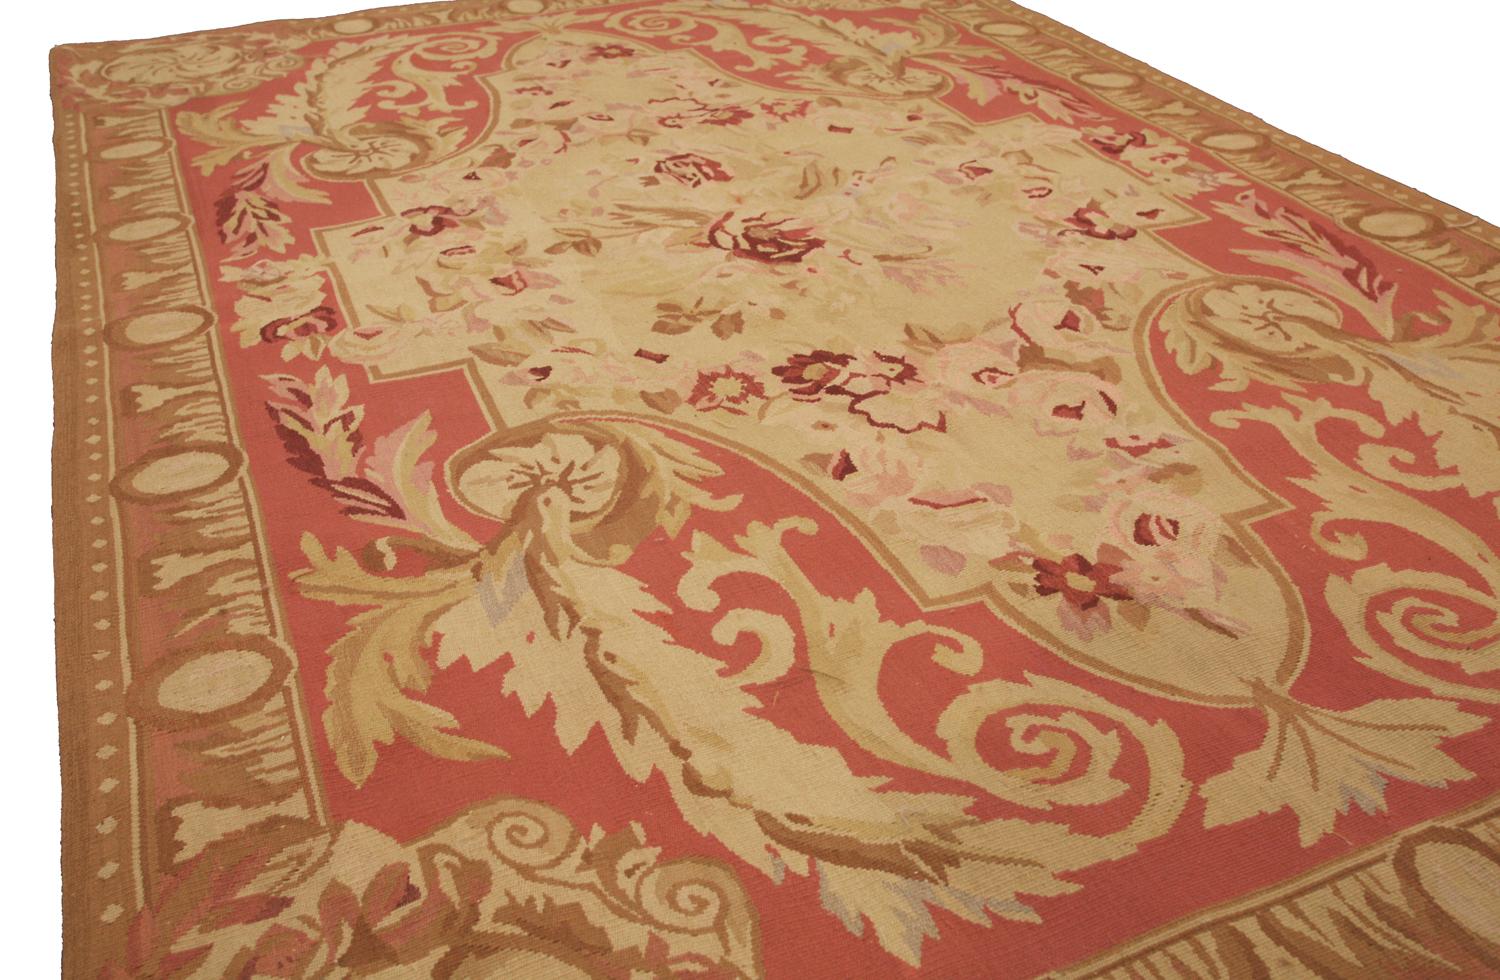 This French Style Aubusson flat-weave rug is a beautiful addition to any room. It features a nice color palette with elegant ornamentation of flowers, floats majestically on this classical french style aubusson. This rug is perfect for contemporary